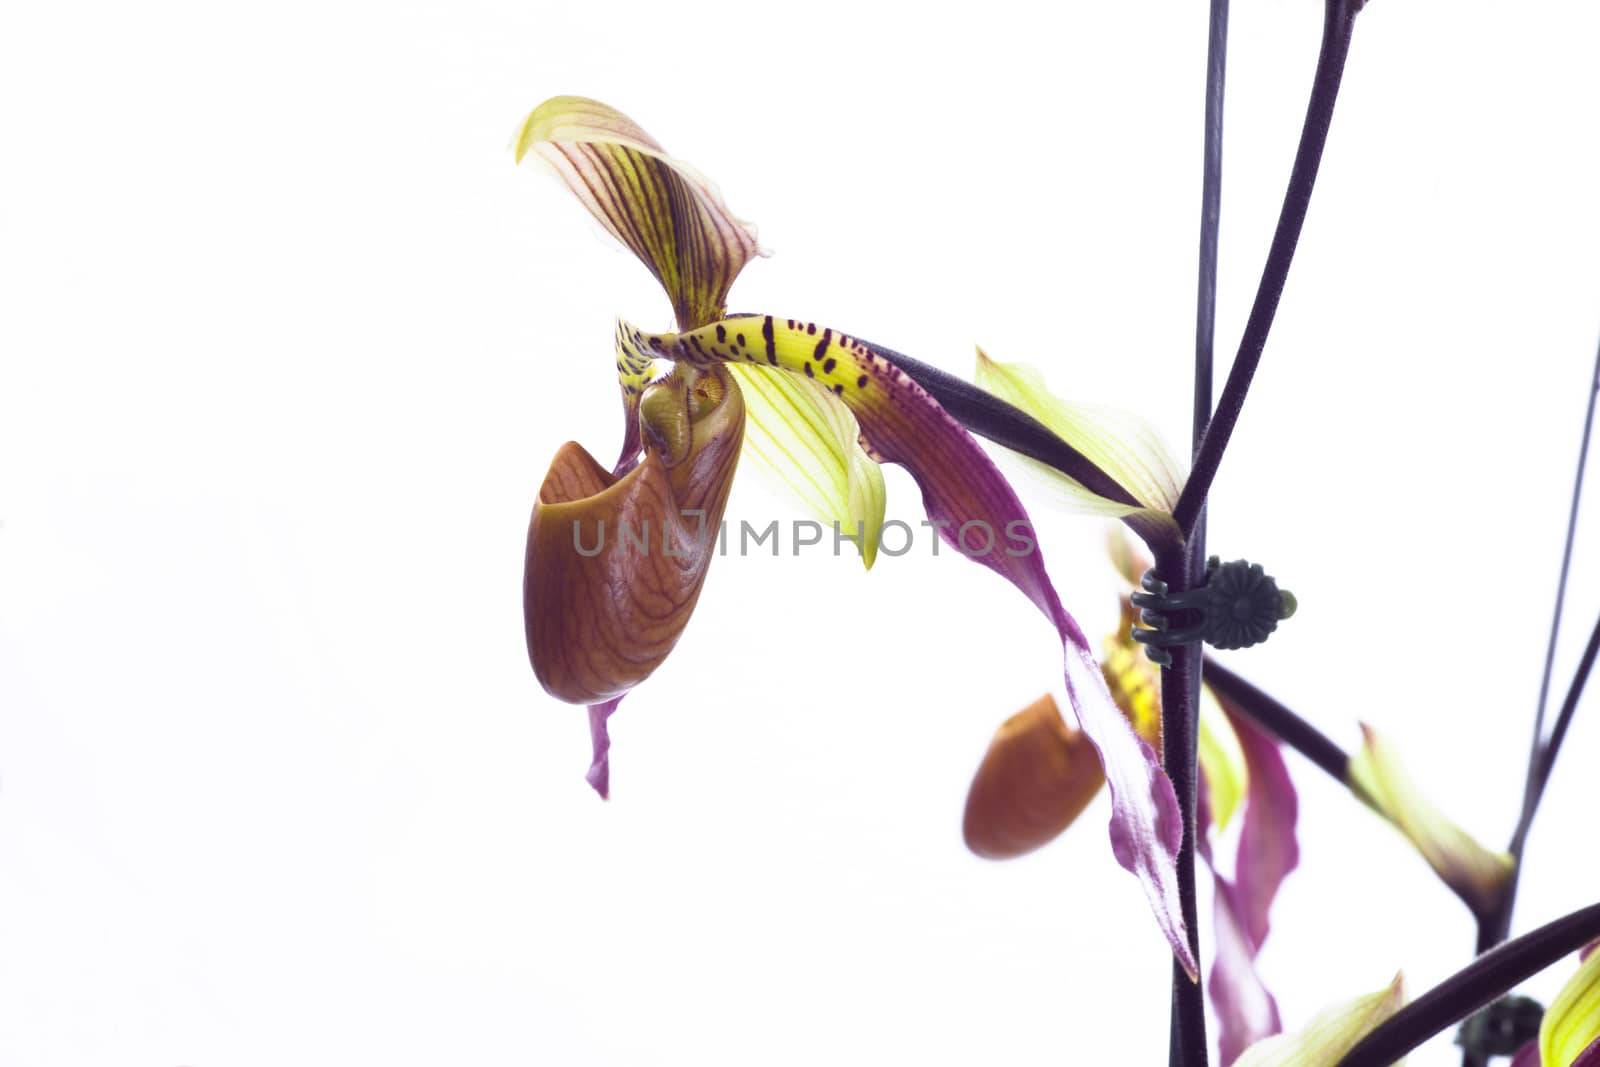 Paphiopedilum orchids flower. by jee1999